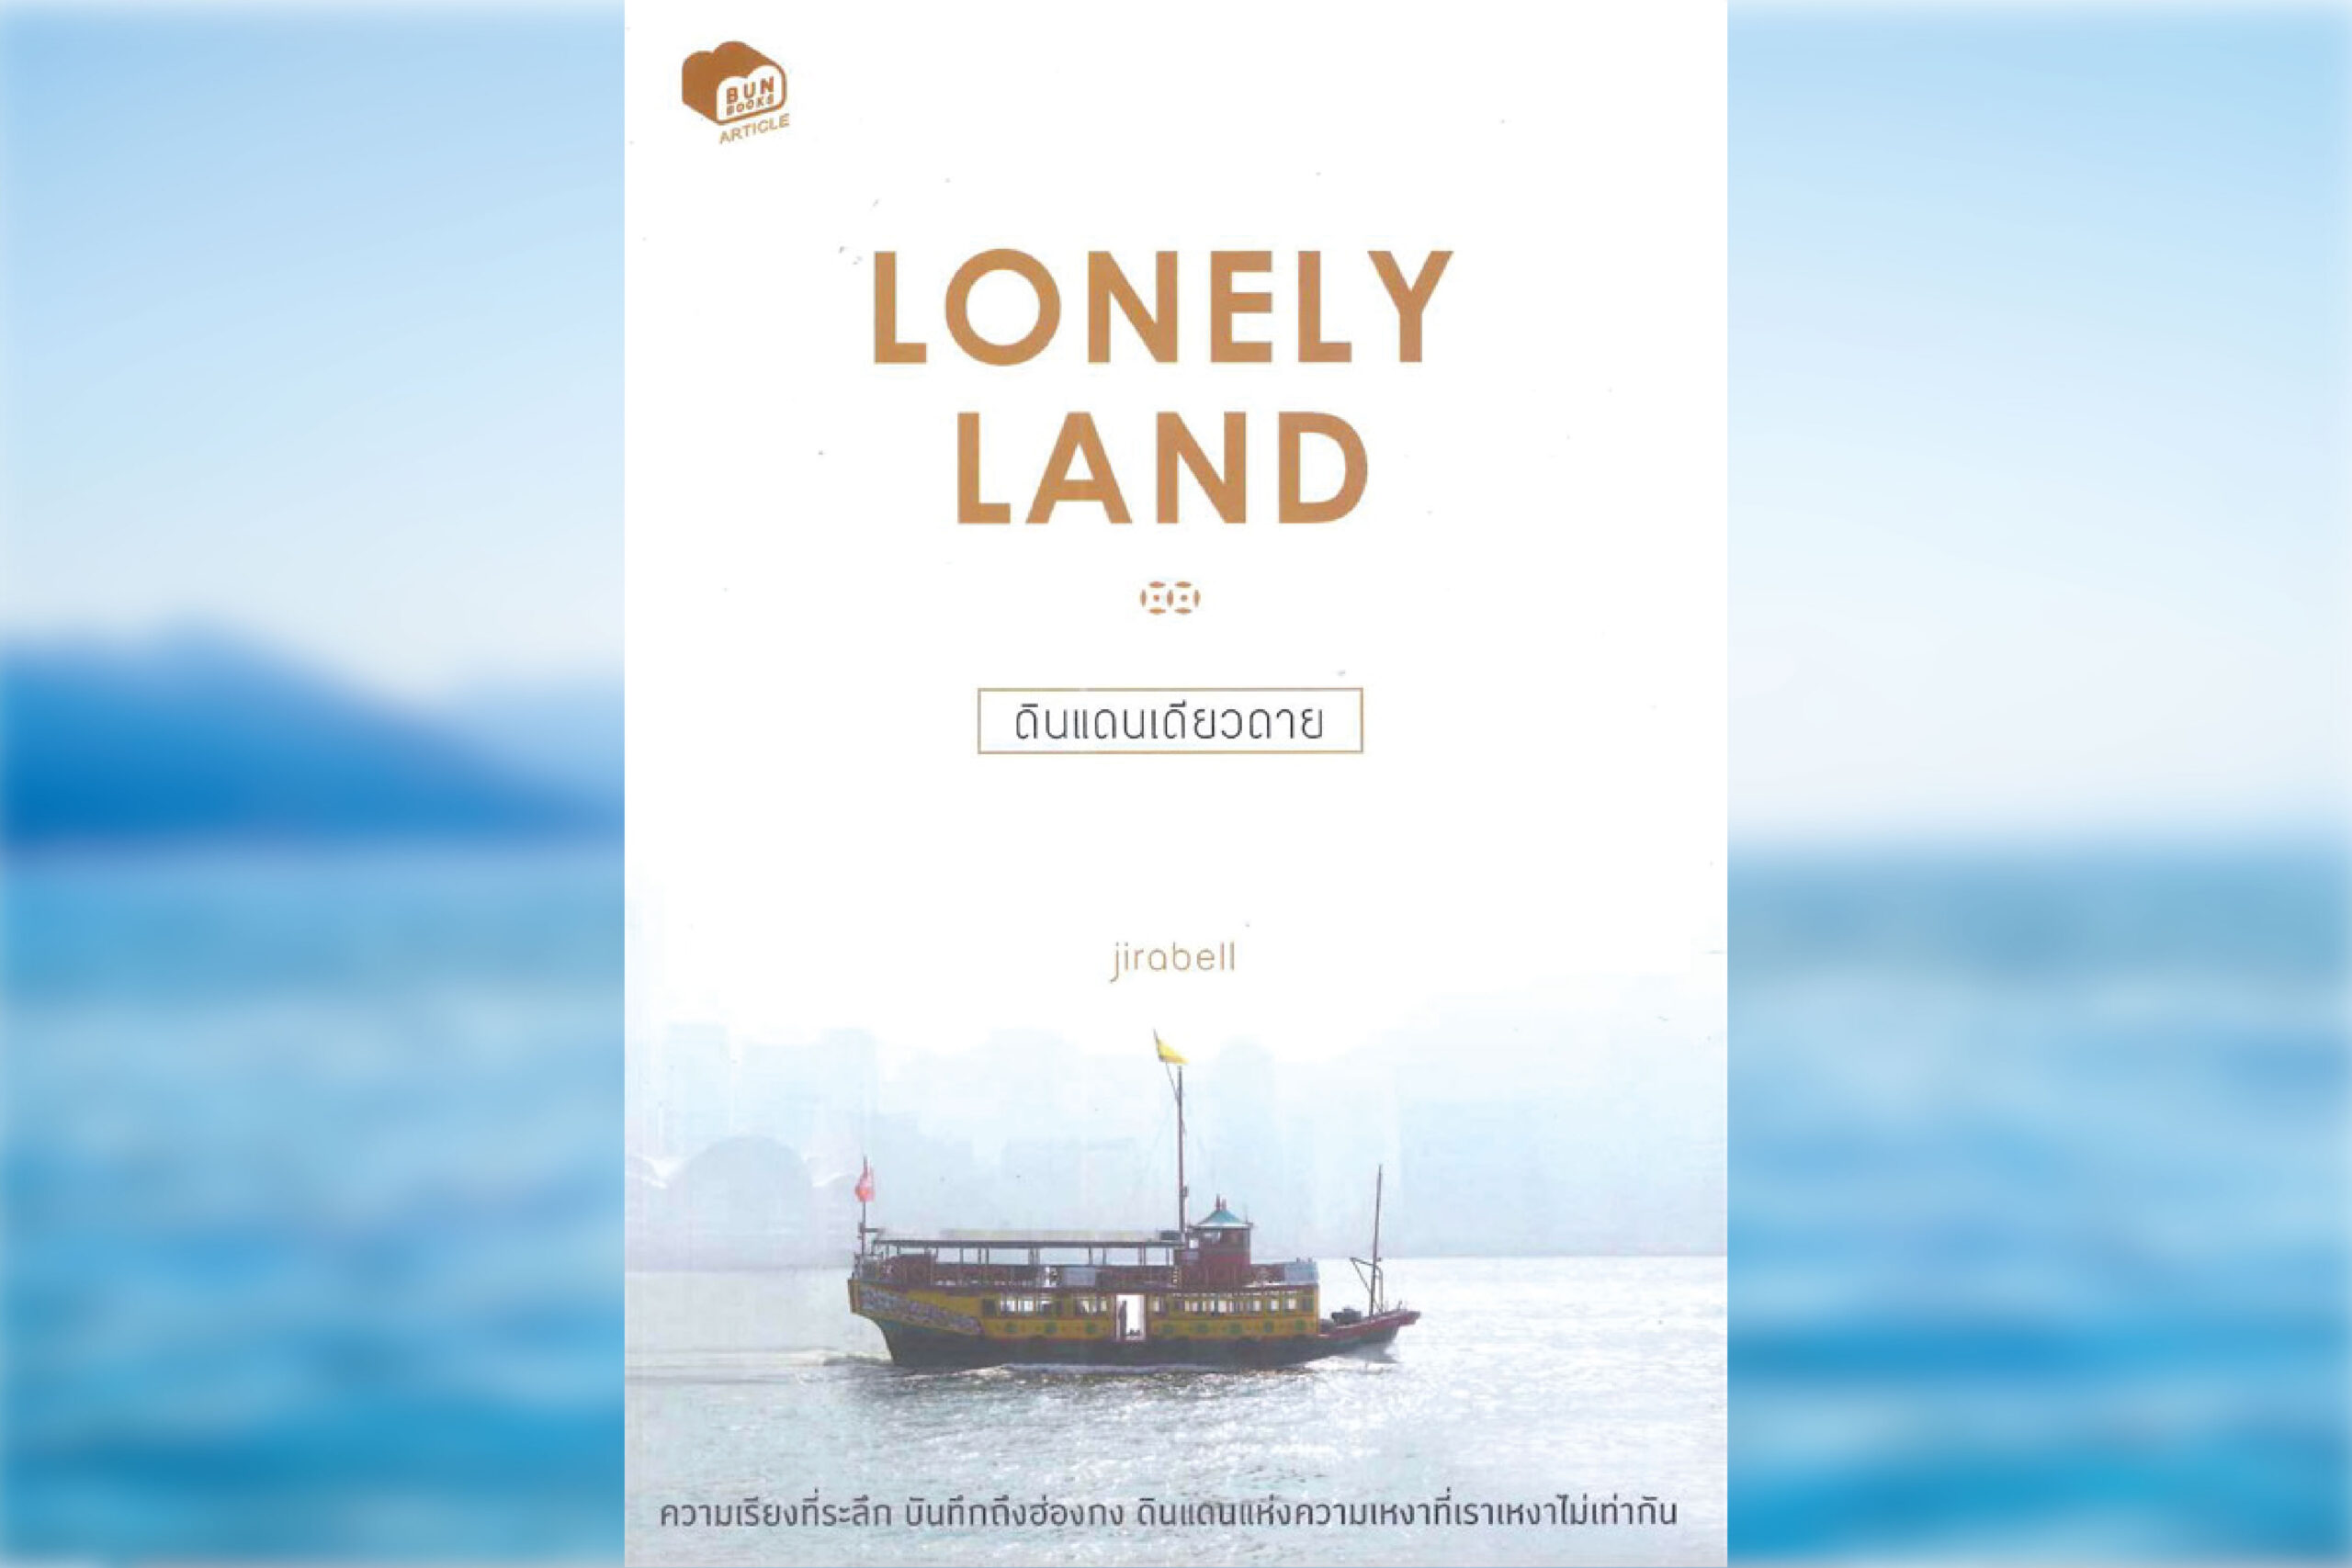 3. Lonely Land